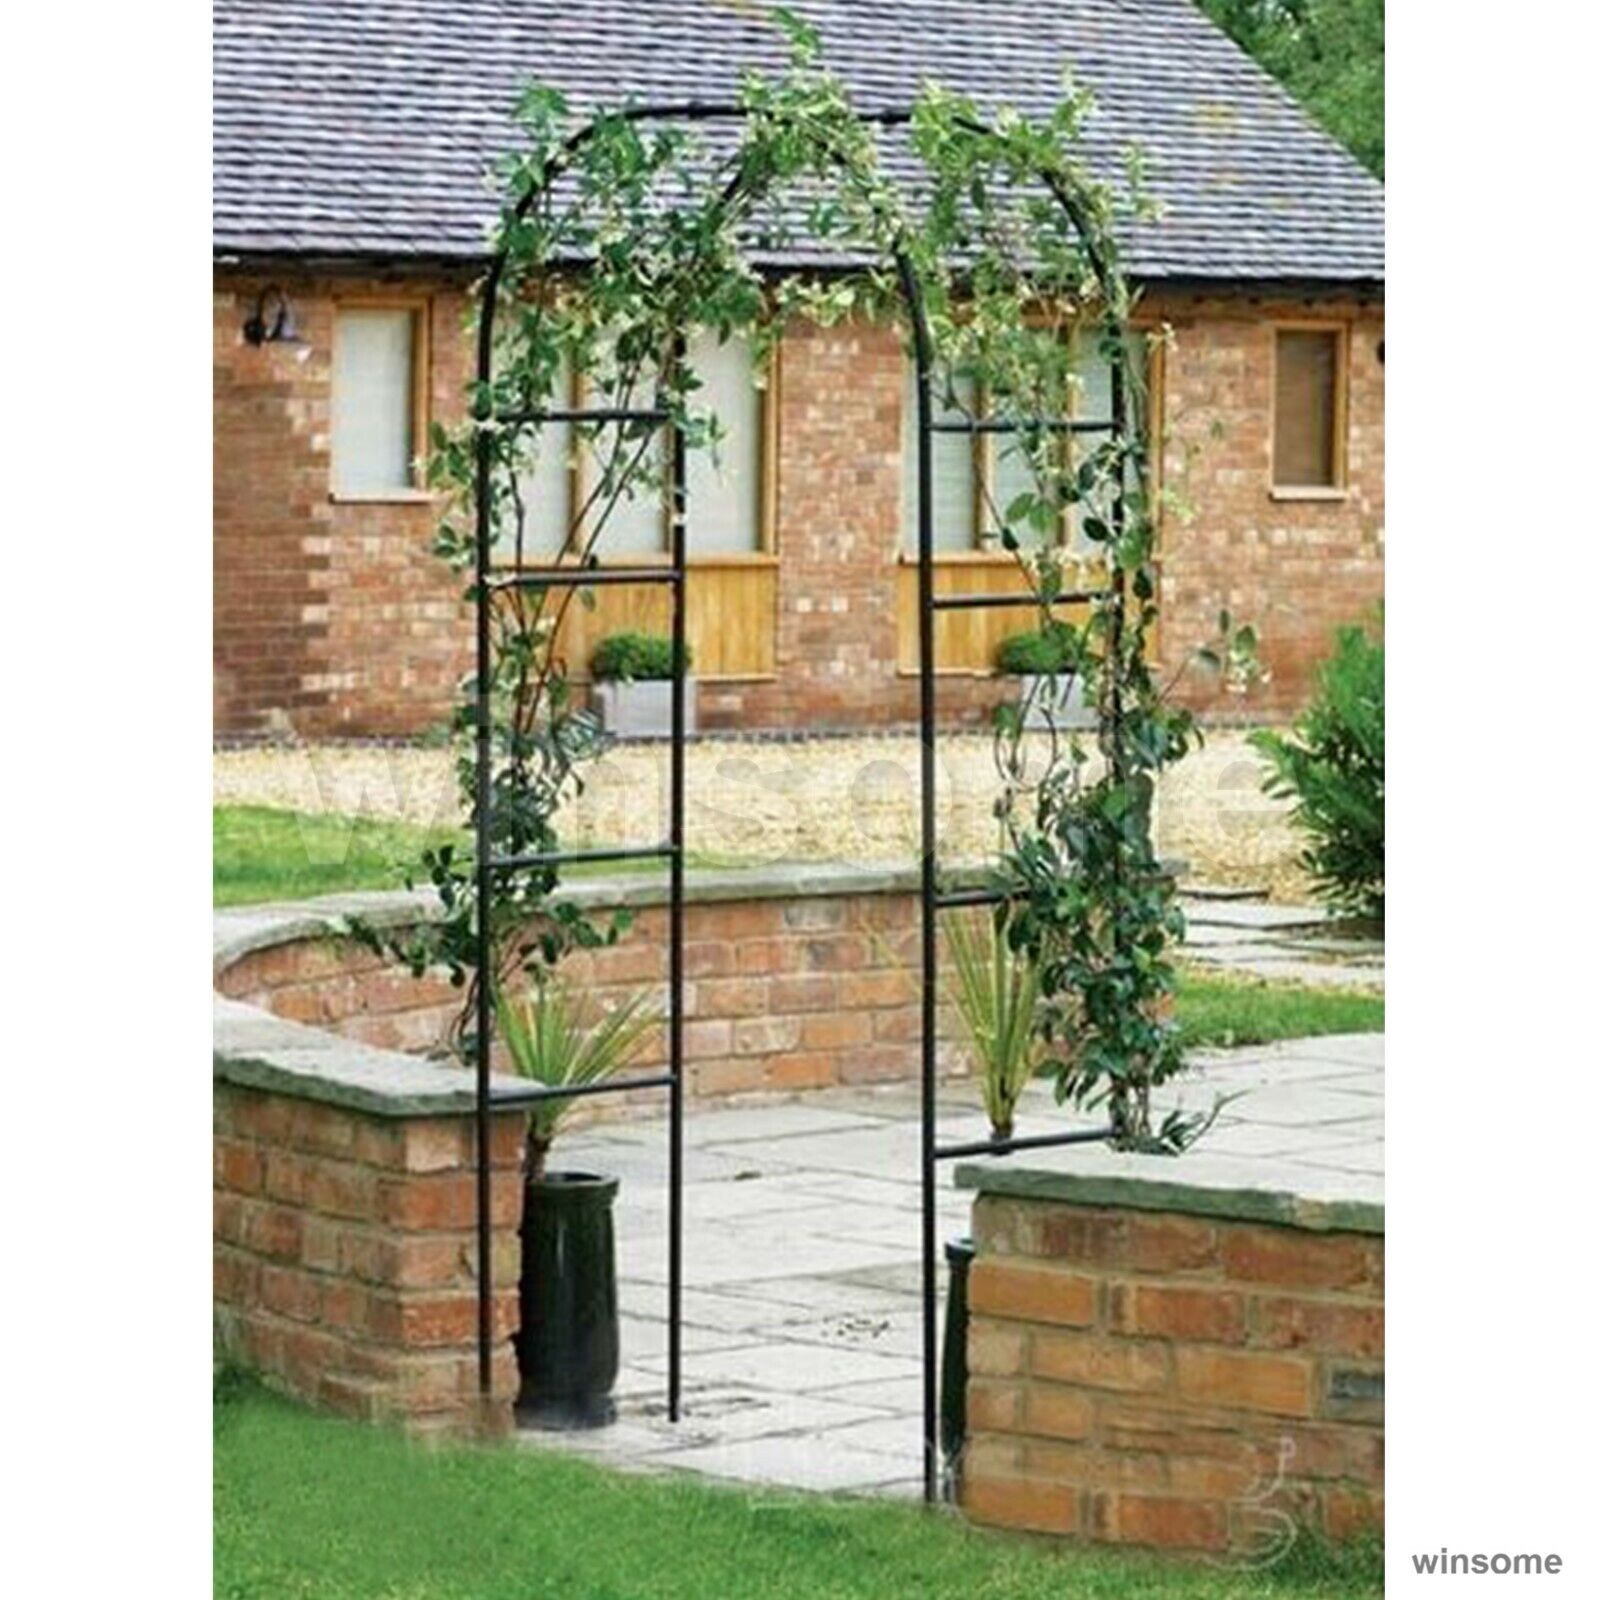 Garden Arch Roses Ivy Flowers Stee Max 68% OFF Trailing Climbing Plant Las Vegas Mall Metal